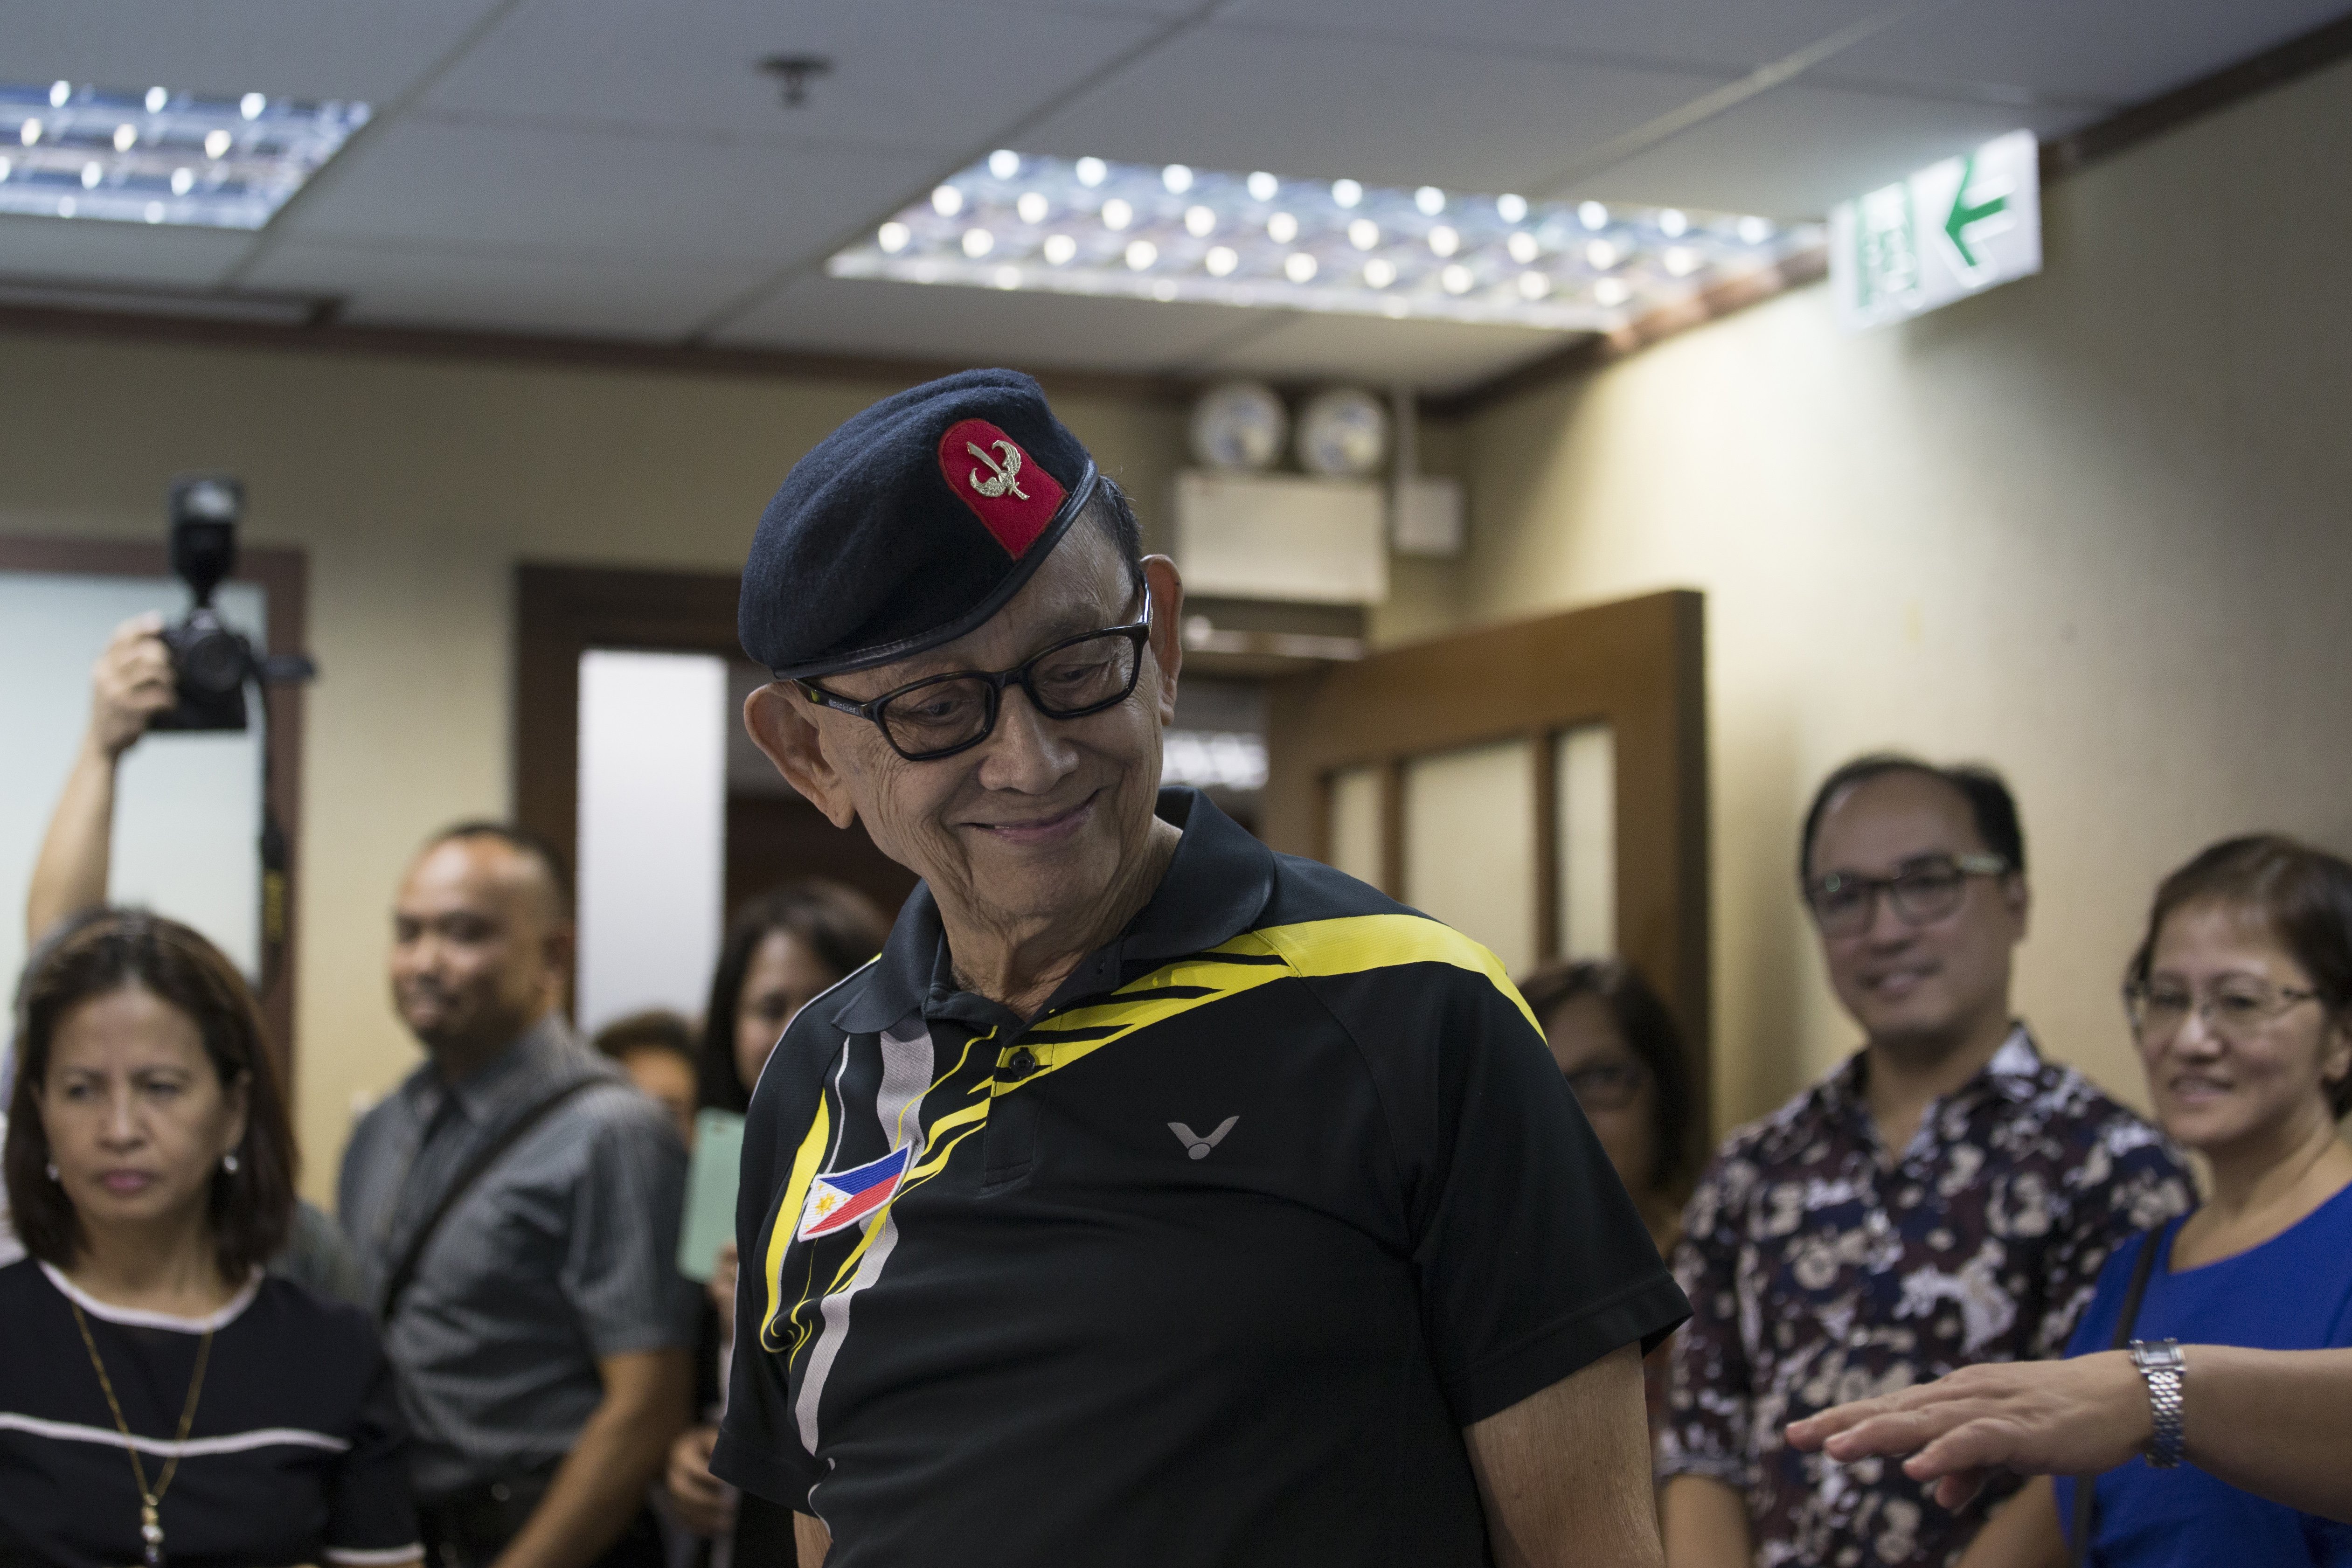 Former Philippines president Fidel Ramos smiles at start of a press conference in Hong Kong on August 9, 2016. Ramos said on August 9 he would meet contacts with links to Chinese President Xi Jinping as part of a trip to Hong Kong aimed at improving ties between Manila and Beijing. / AFP PHOTO / AARON TAM